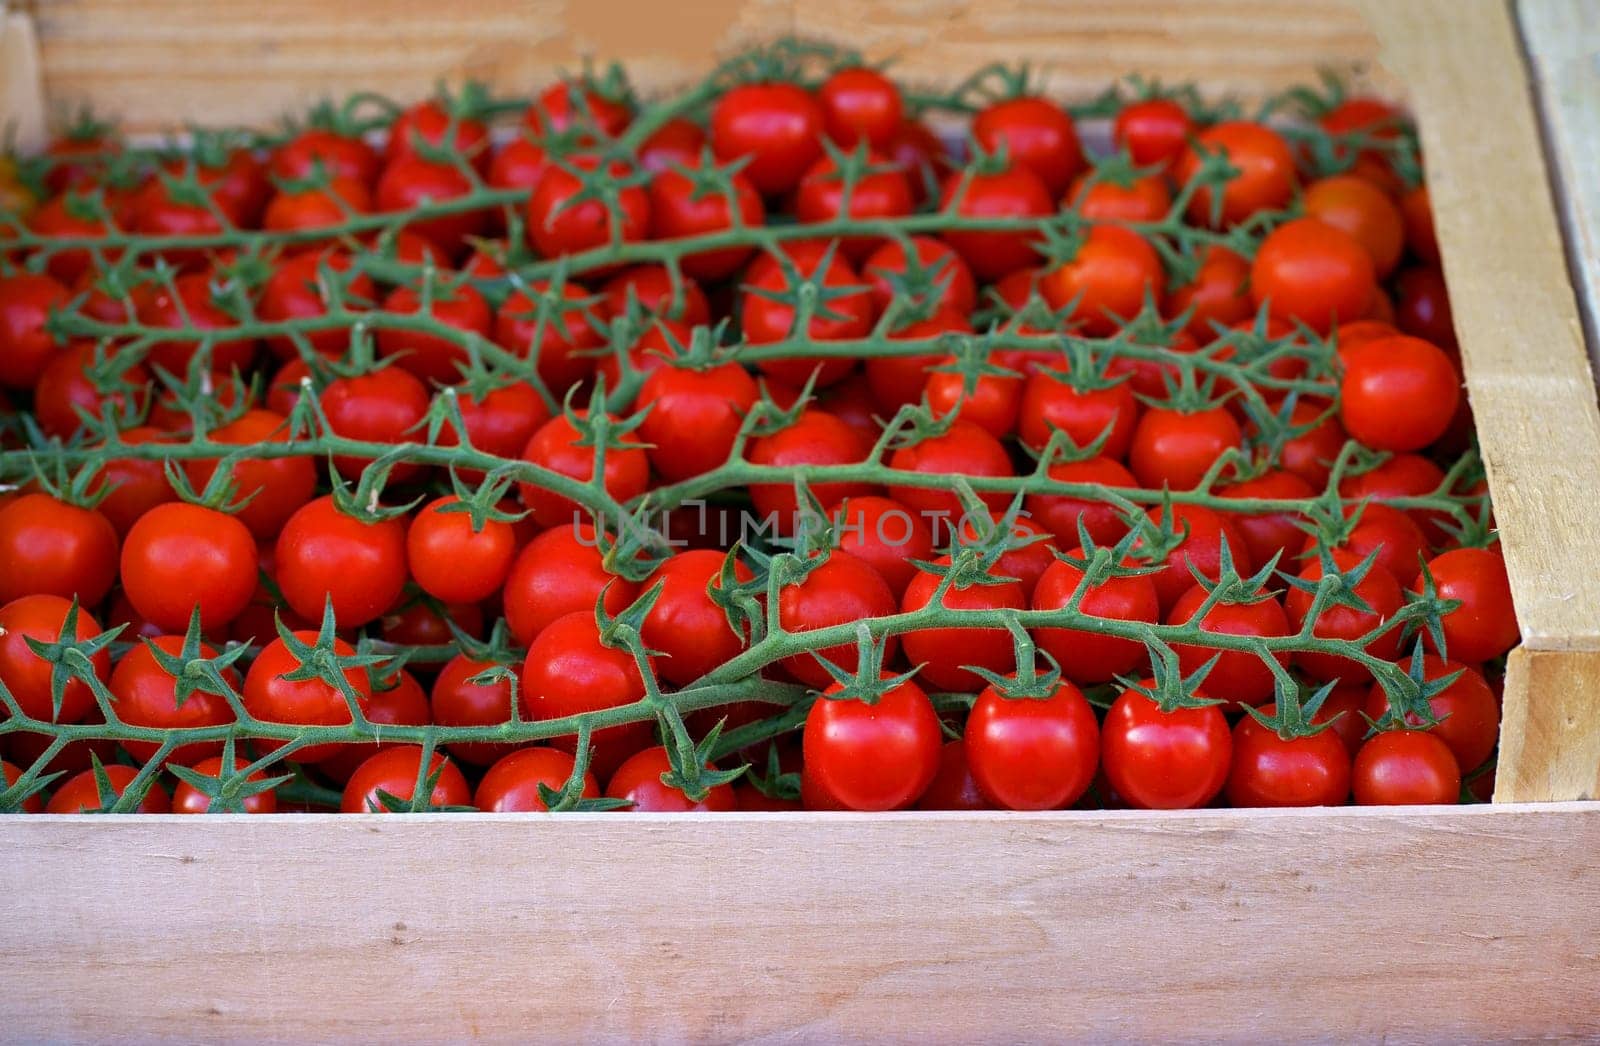 tomatoes are sold at the market